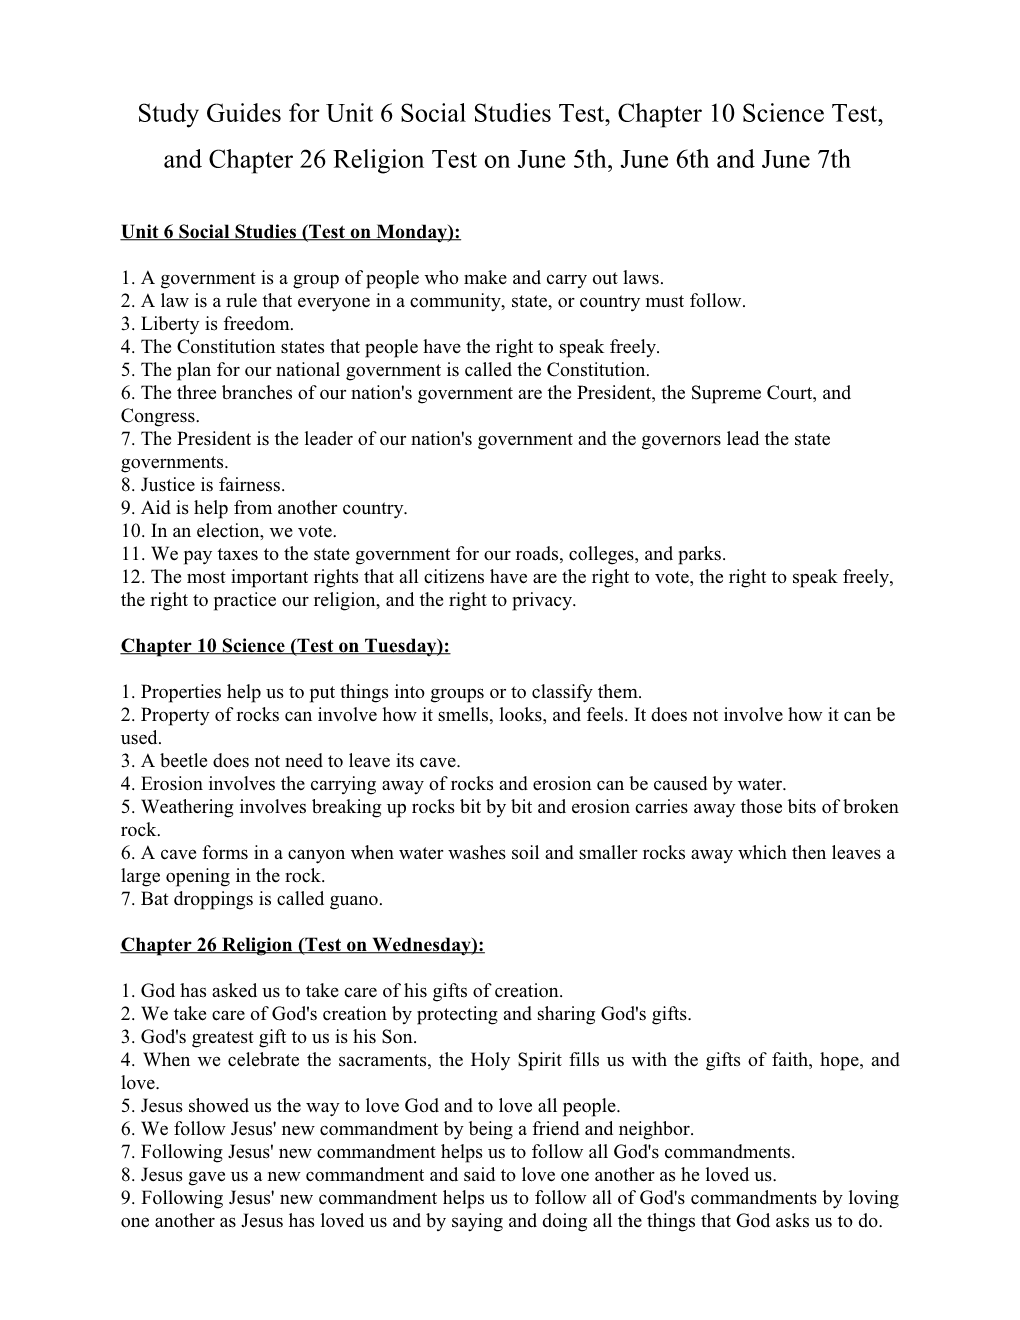 Study Guide for Chapter 3 Religion Test